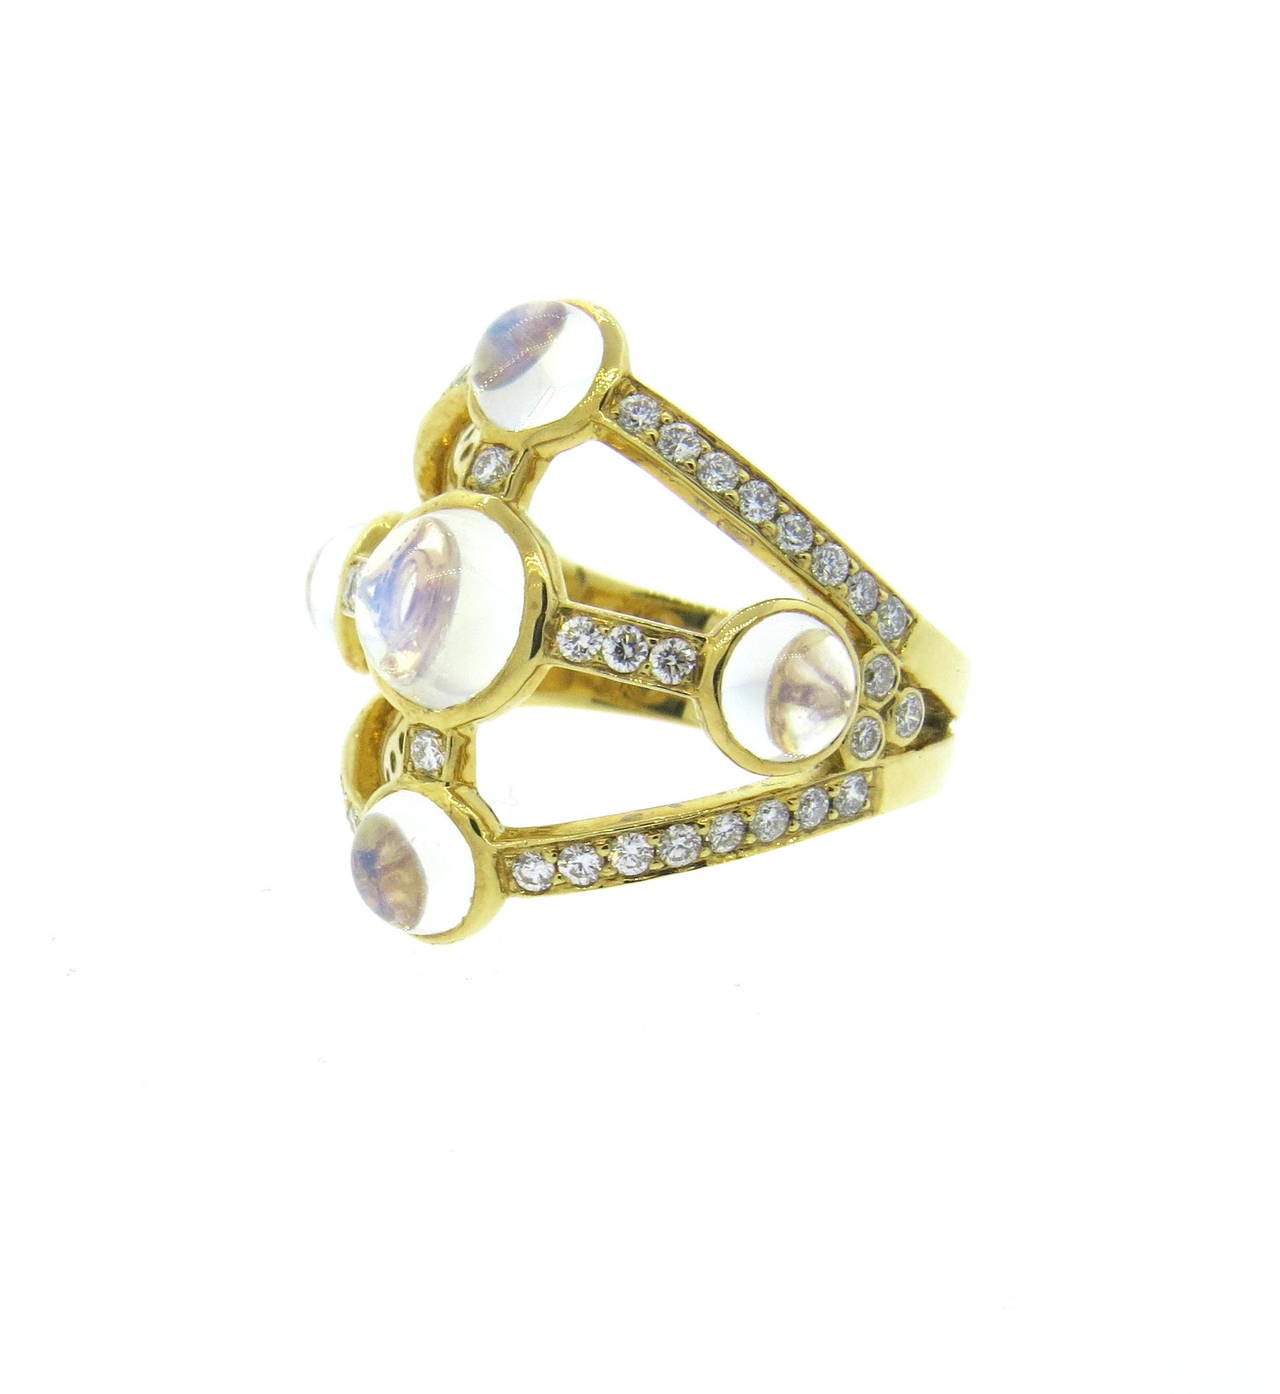 18k gold ring by Temple St. Clair, featuring 0.71ctw in G/Vs diamonds and moonstone cabochons. Ring is a size 6 1/2, ring top is 21mm at widest point. Marked with Temple hallmark and 750. Weight 9 grams.
Retails for $4500